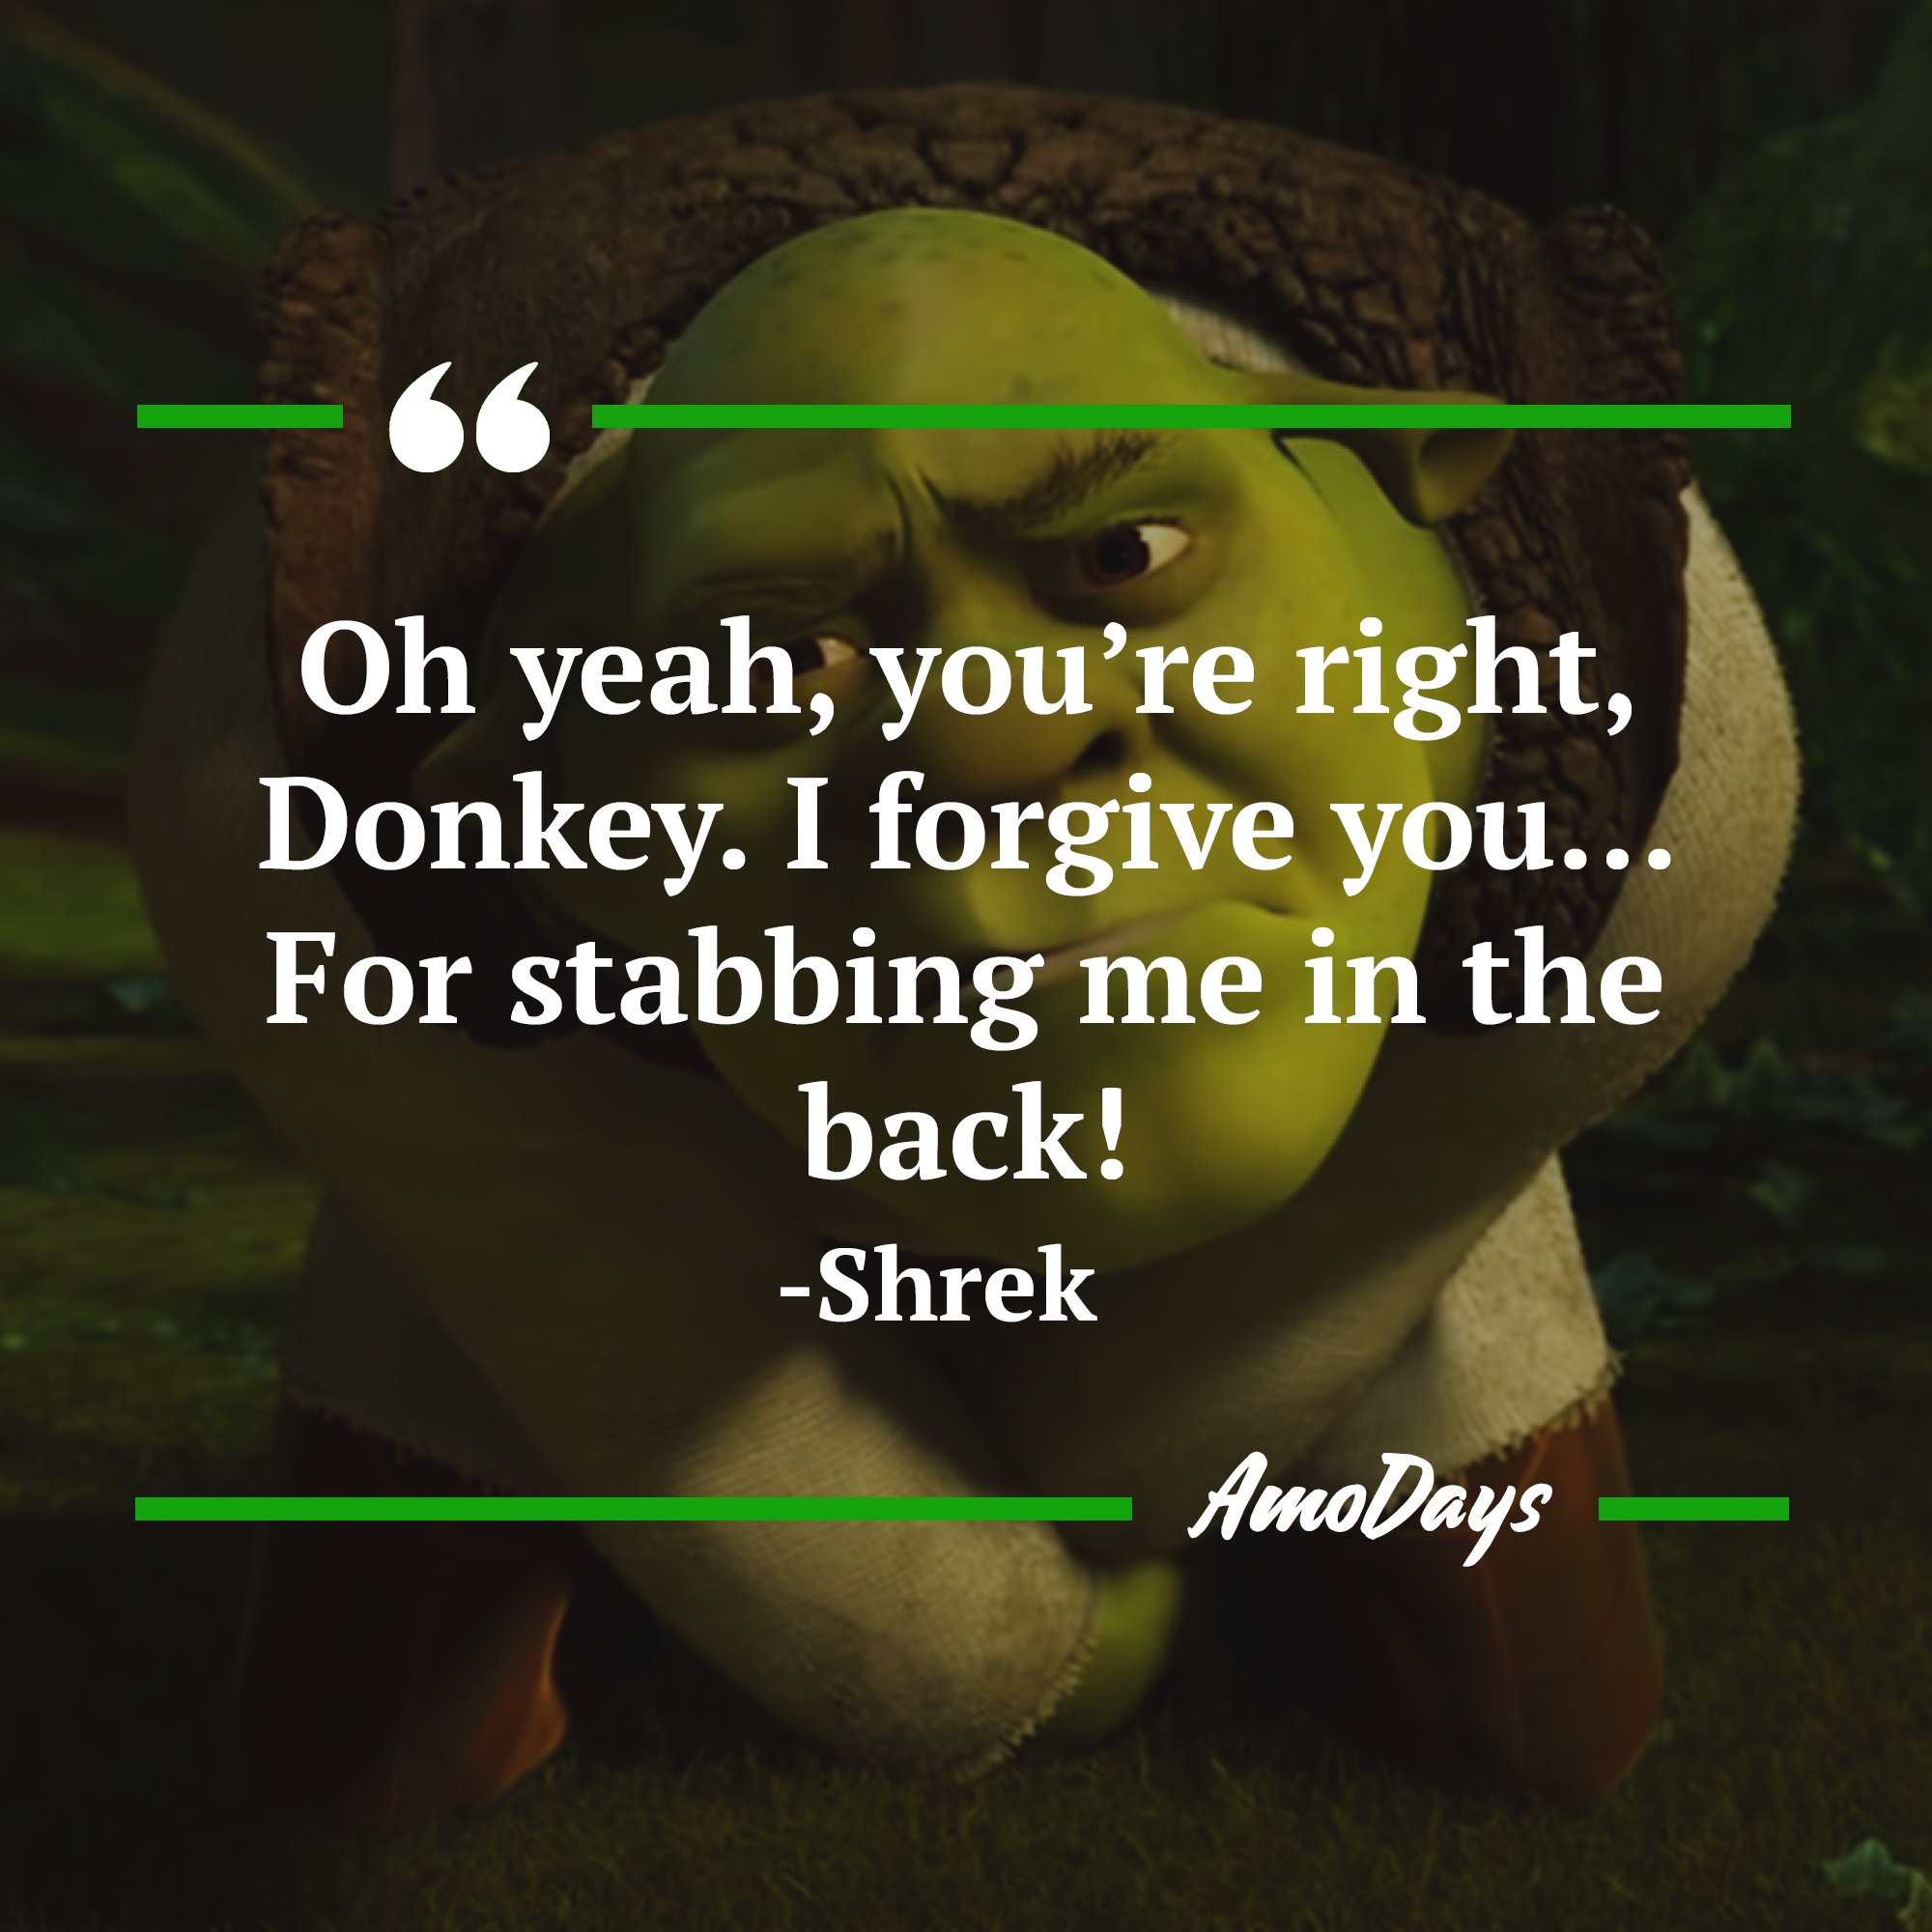 Shrek's quote: "Oh yeah, you’re right, Donkey. I forgive you… For stabbing me in the back!” | Image: AmoDays